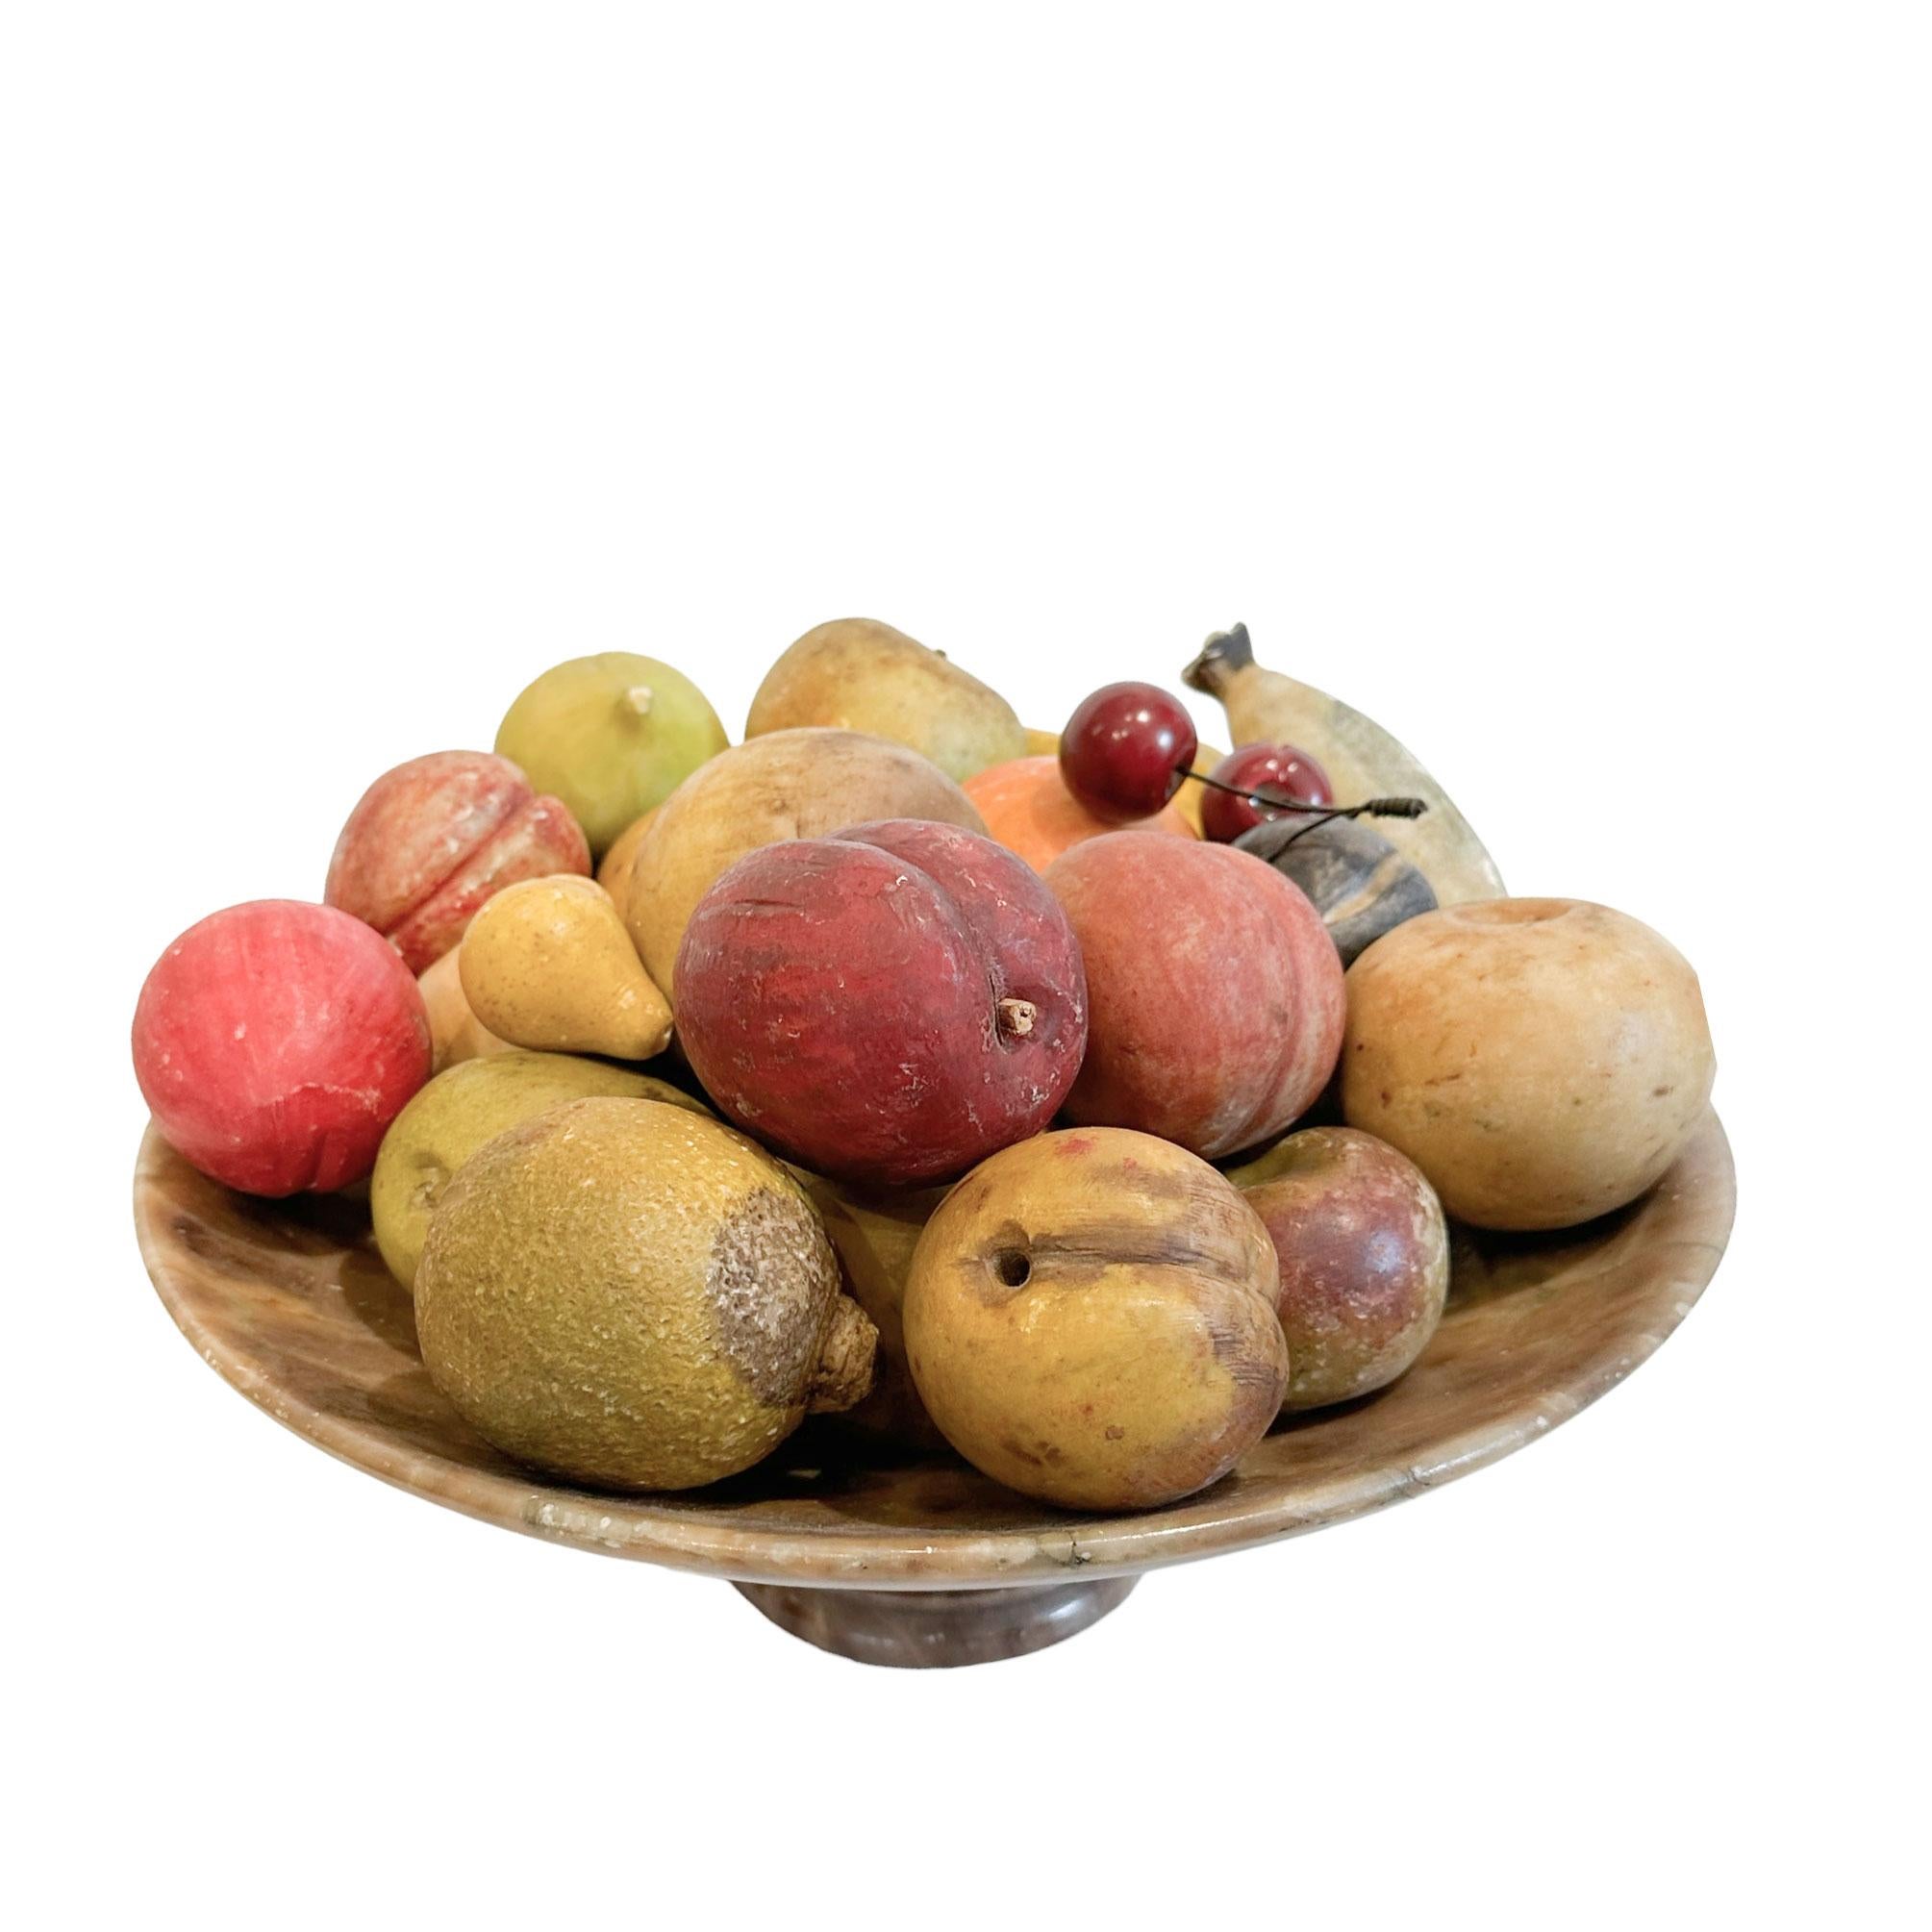 Assortment of American carved and painted stone fruit with marble compote.
Comprising of 23 pieces; one lemon, three intertwined cherries, four pears, one peach, one fig, one orange, two bananas, four small nectarines, seven apples, and one